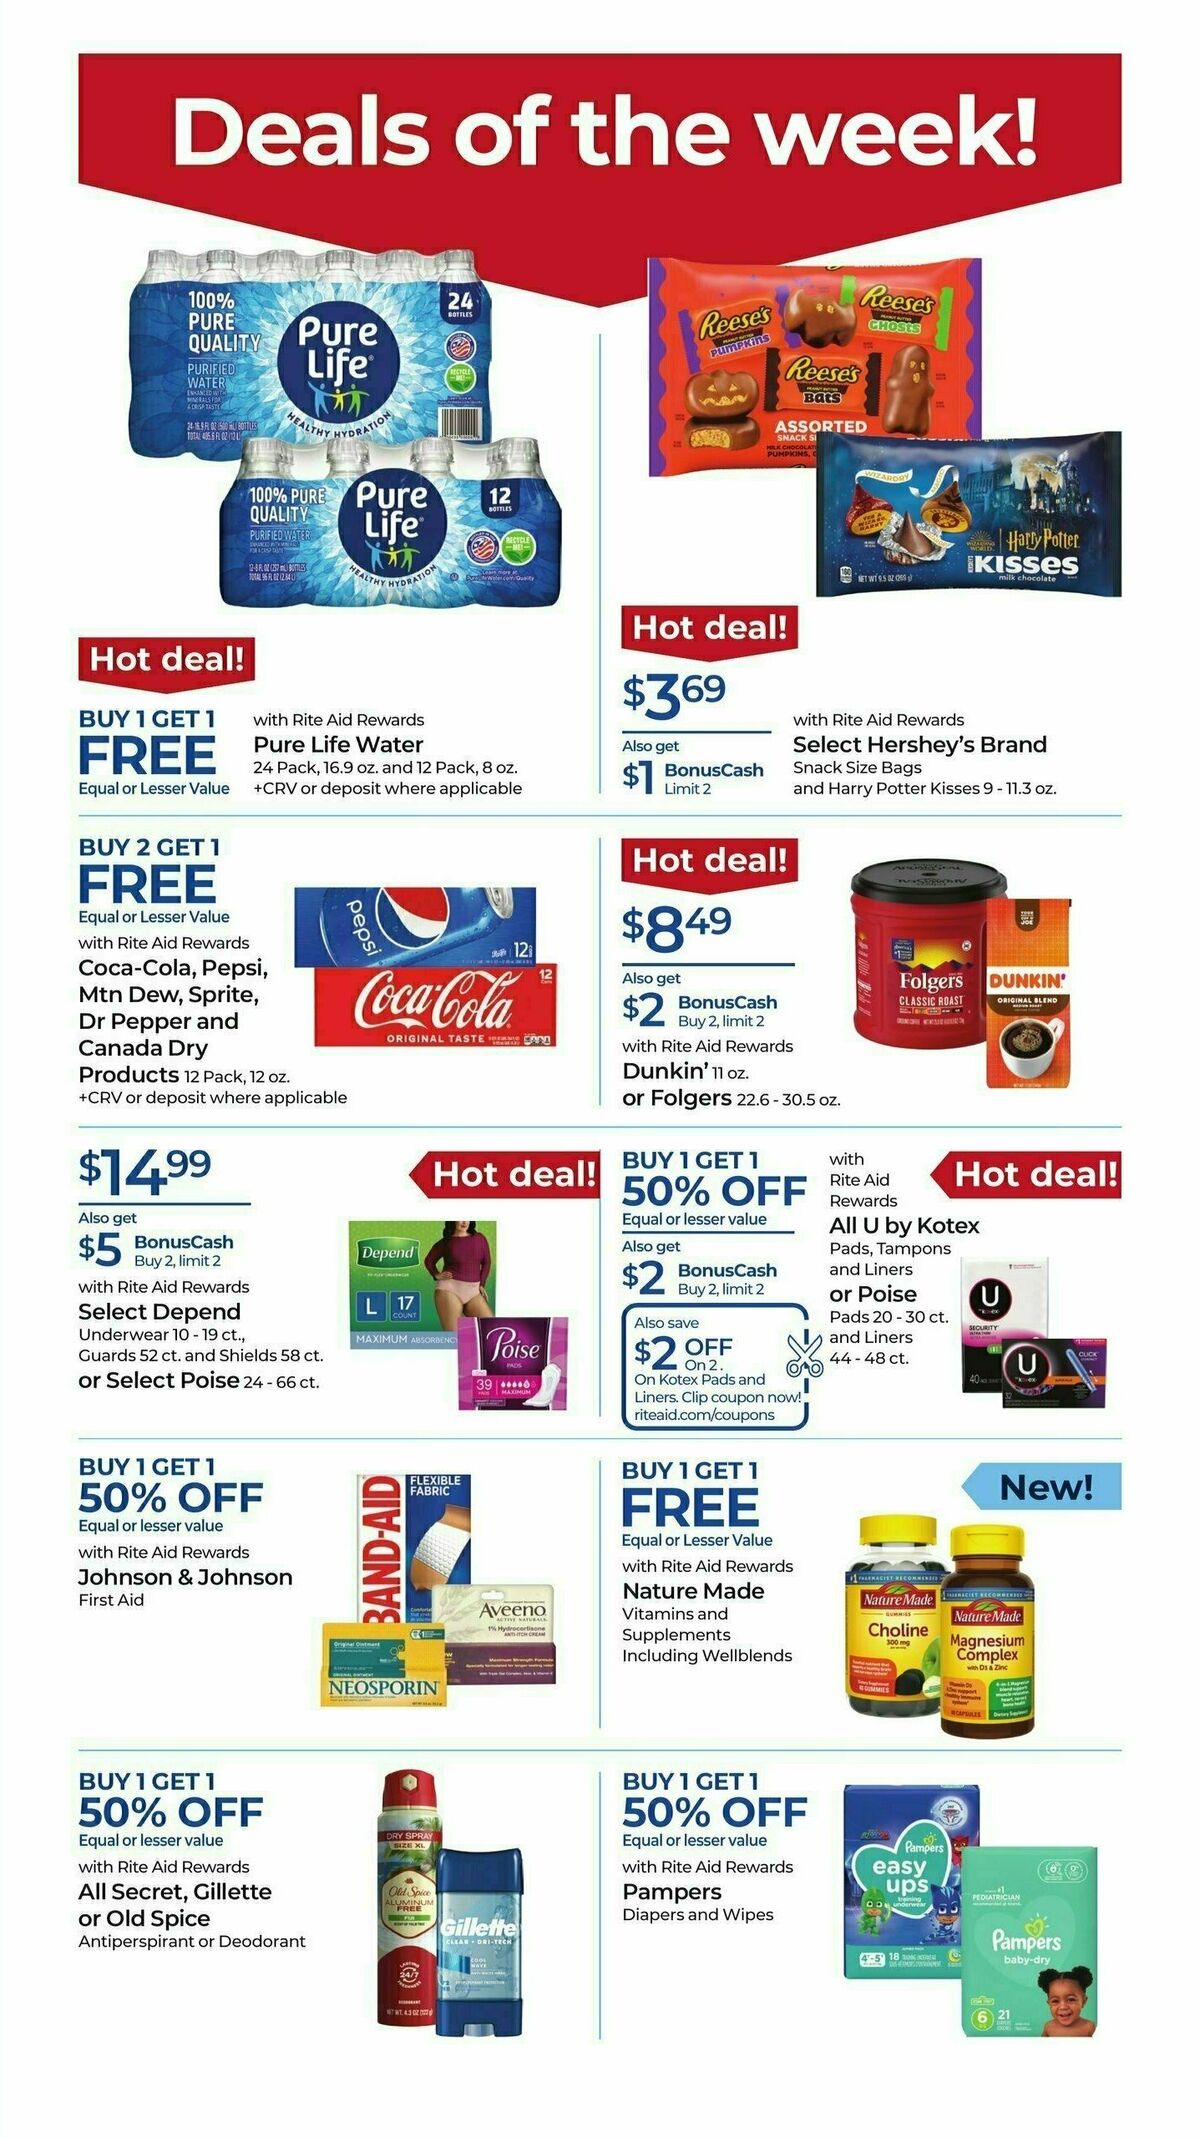 Rite Aid Weekly Ad from September 10